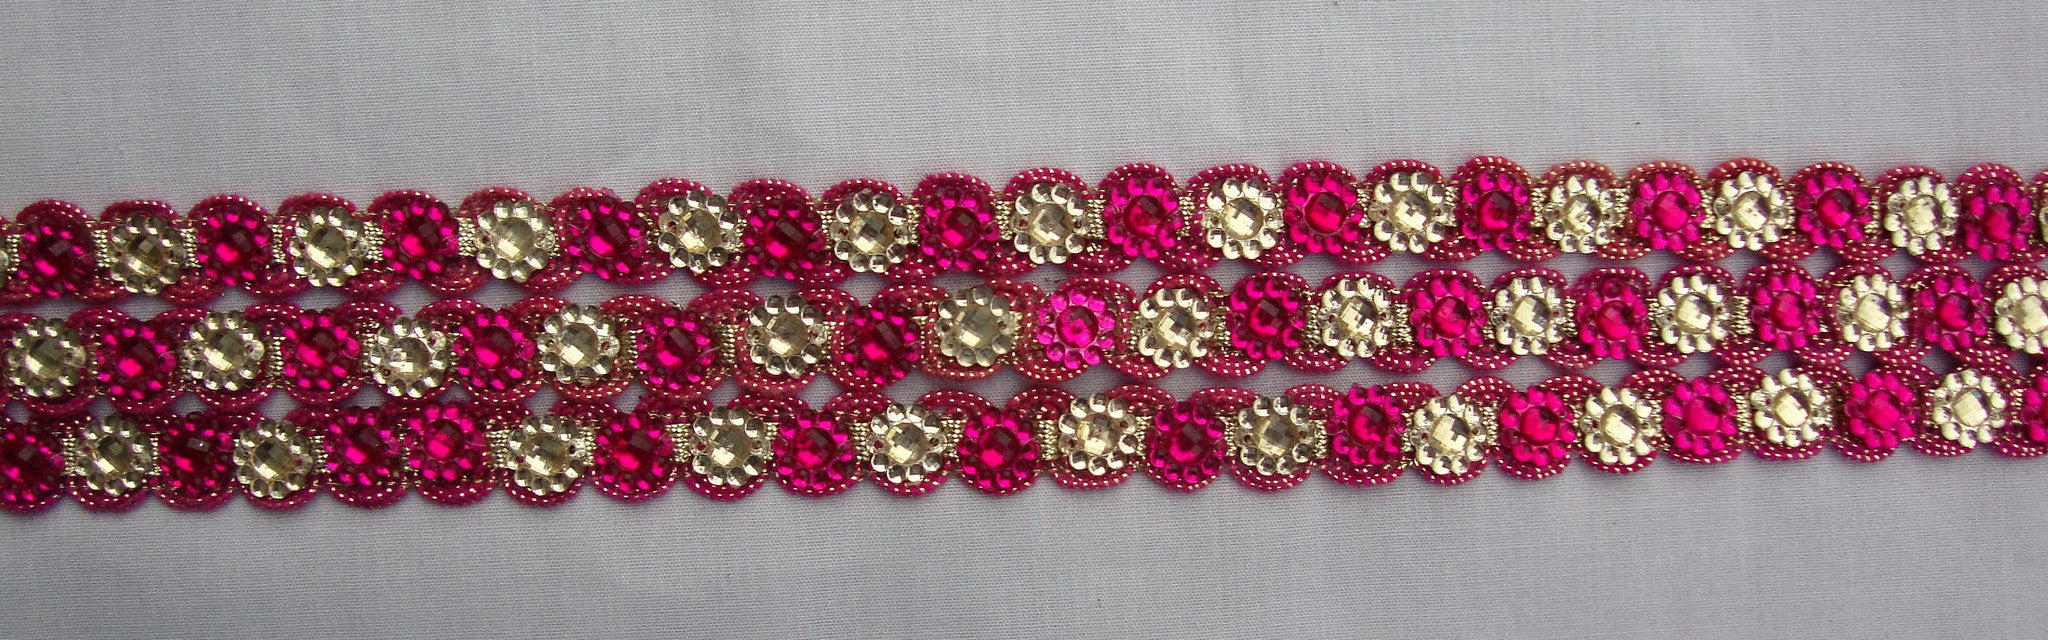 Pink & White Beaded Trimming (Sold as a 3 yard piece)